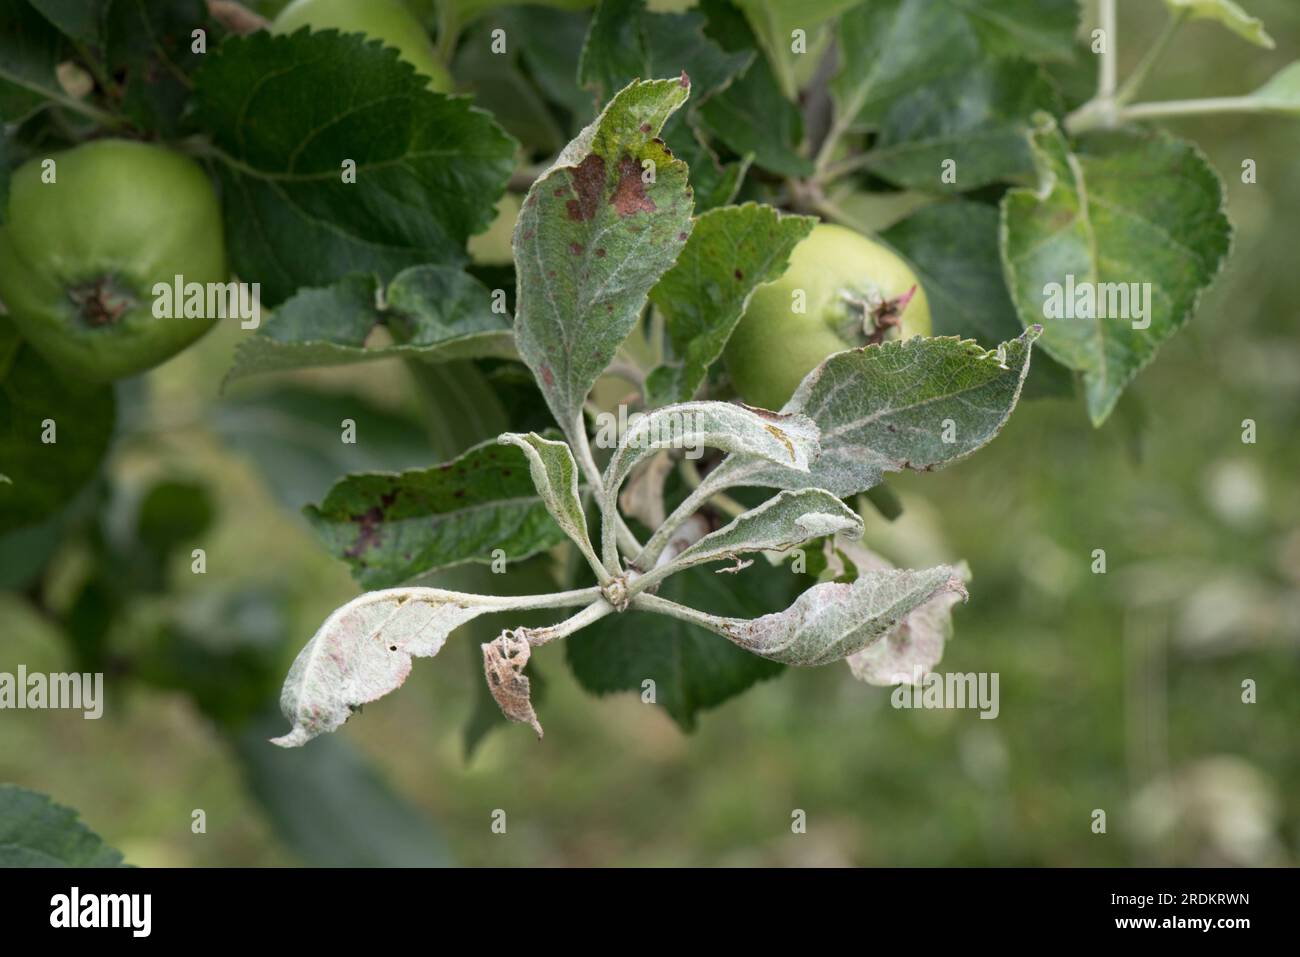 Primary infection of apple mildew (Podosphaera leucotricha) on a terminal eaf cluster at the end of the branch of an orchard tree, Berkshire, June Stock Photo